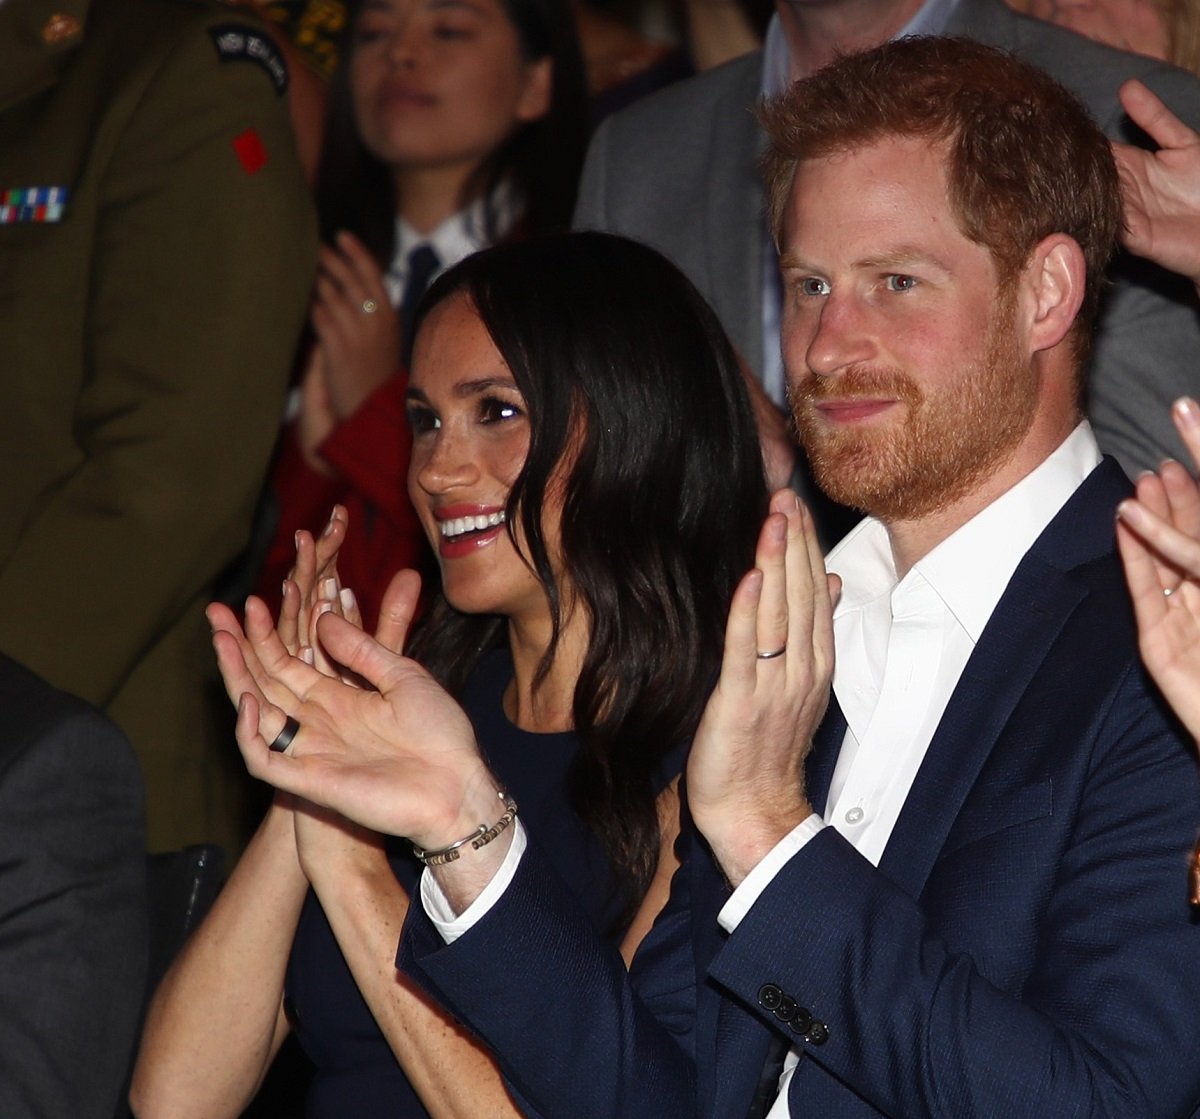 Meghan Markle and Prince Harry watch a cultural performance as they attend the Auckland War Memorial Museum